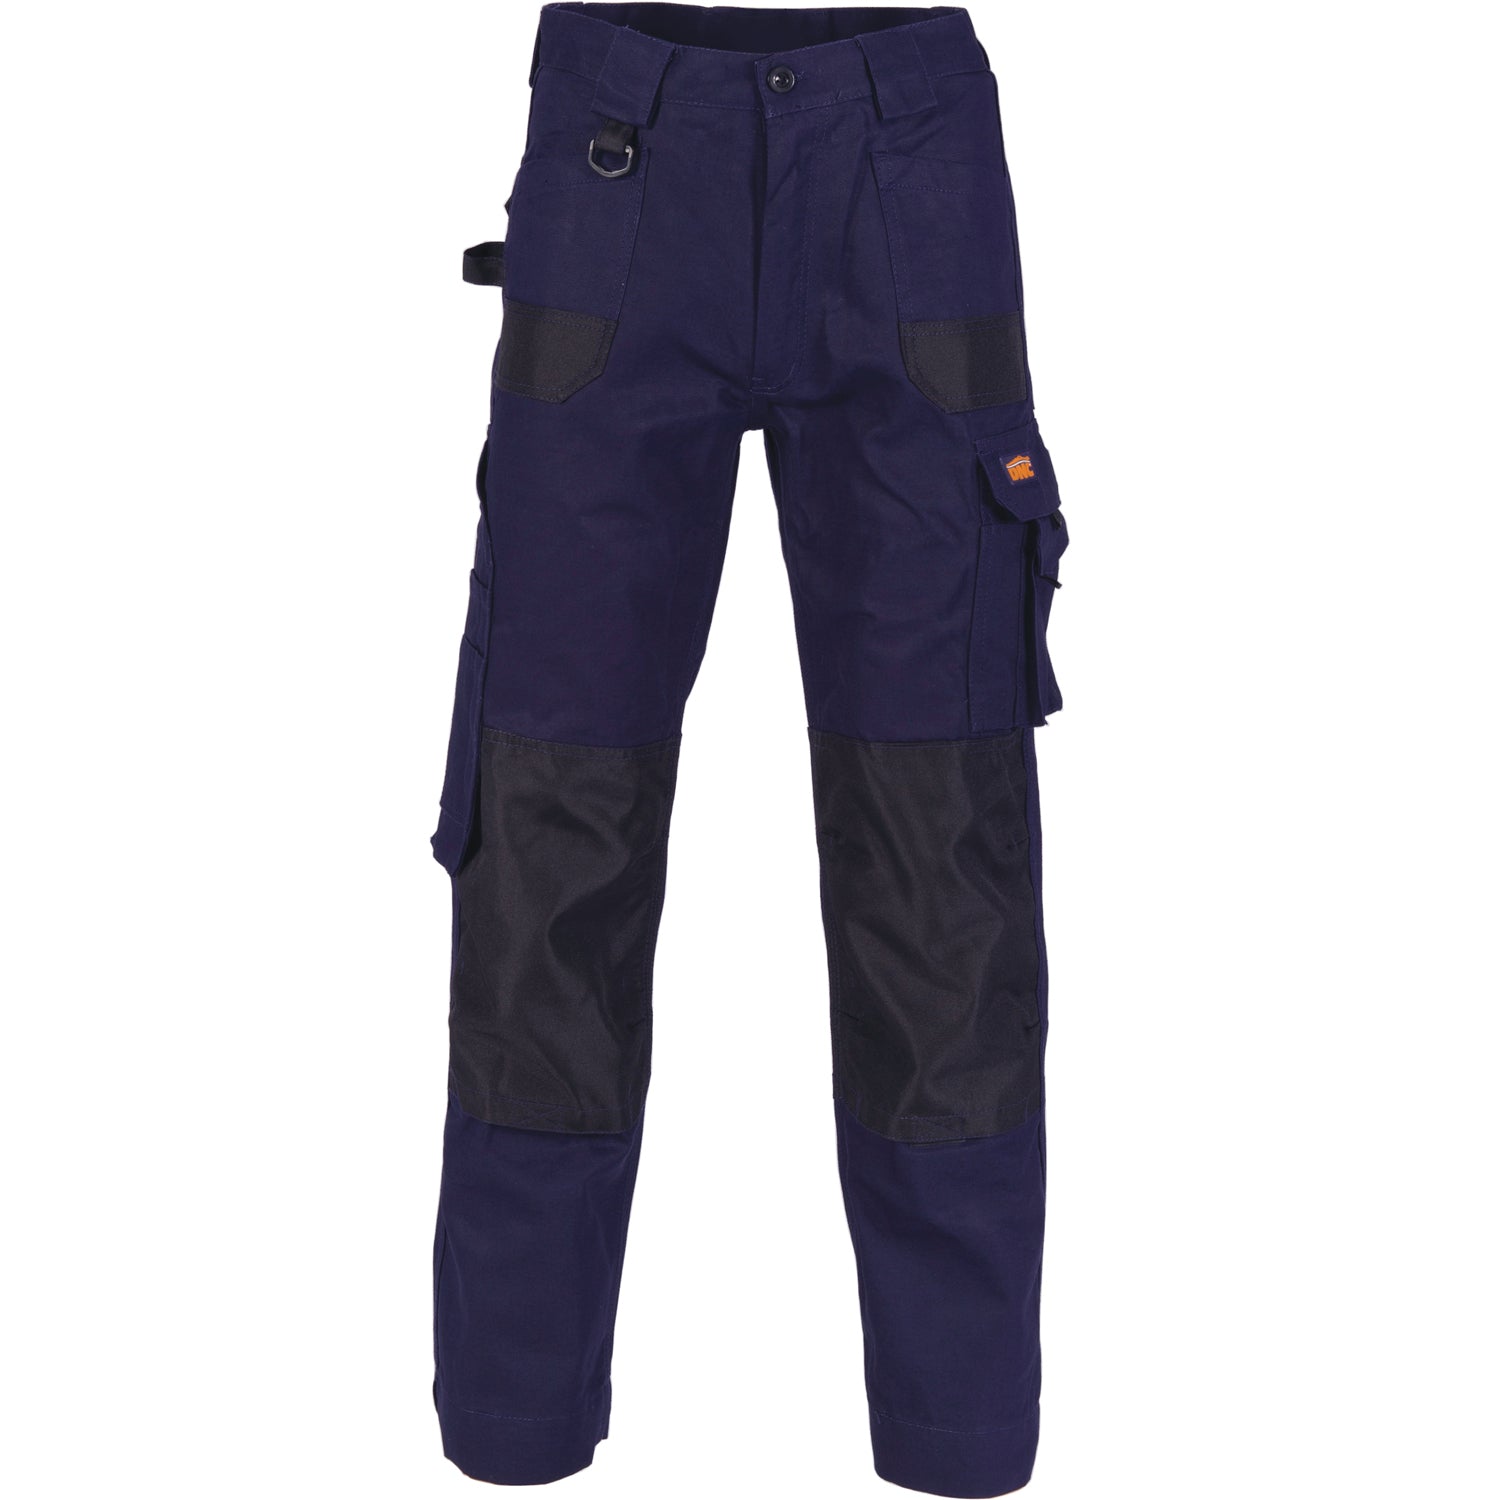 DNC Duratex Cotton Duck Weave Cargo Pants - knee pads not included -(3335)